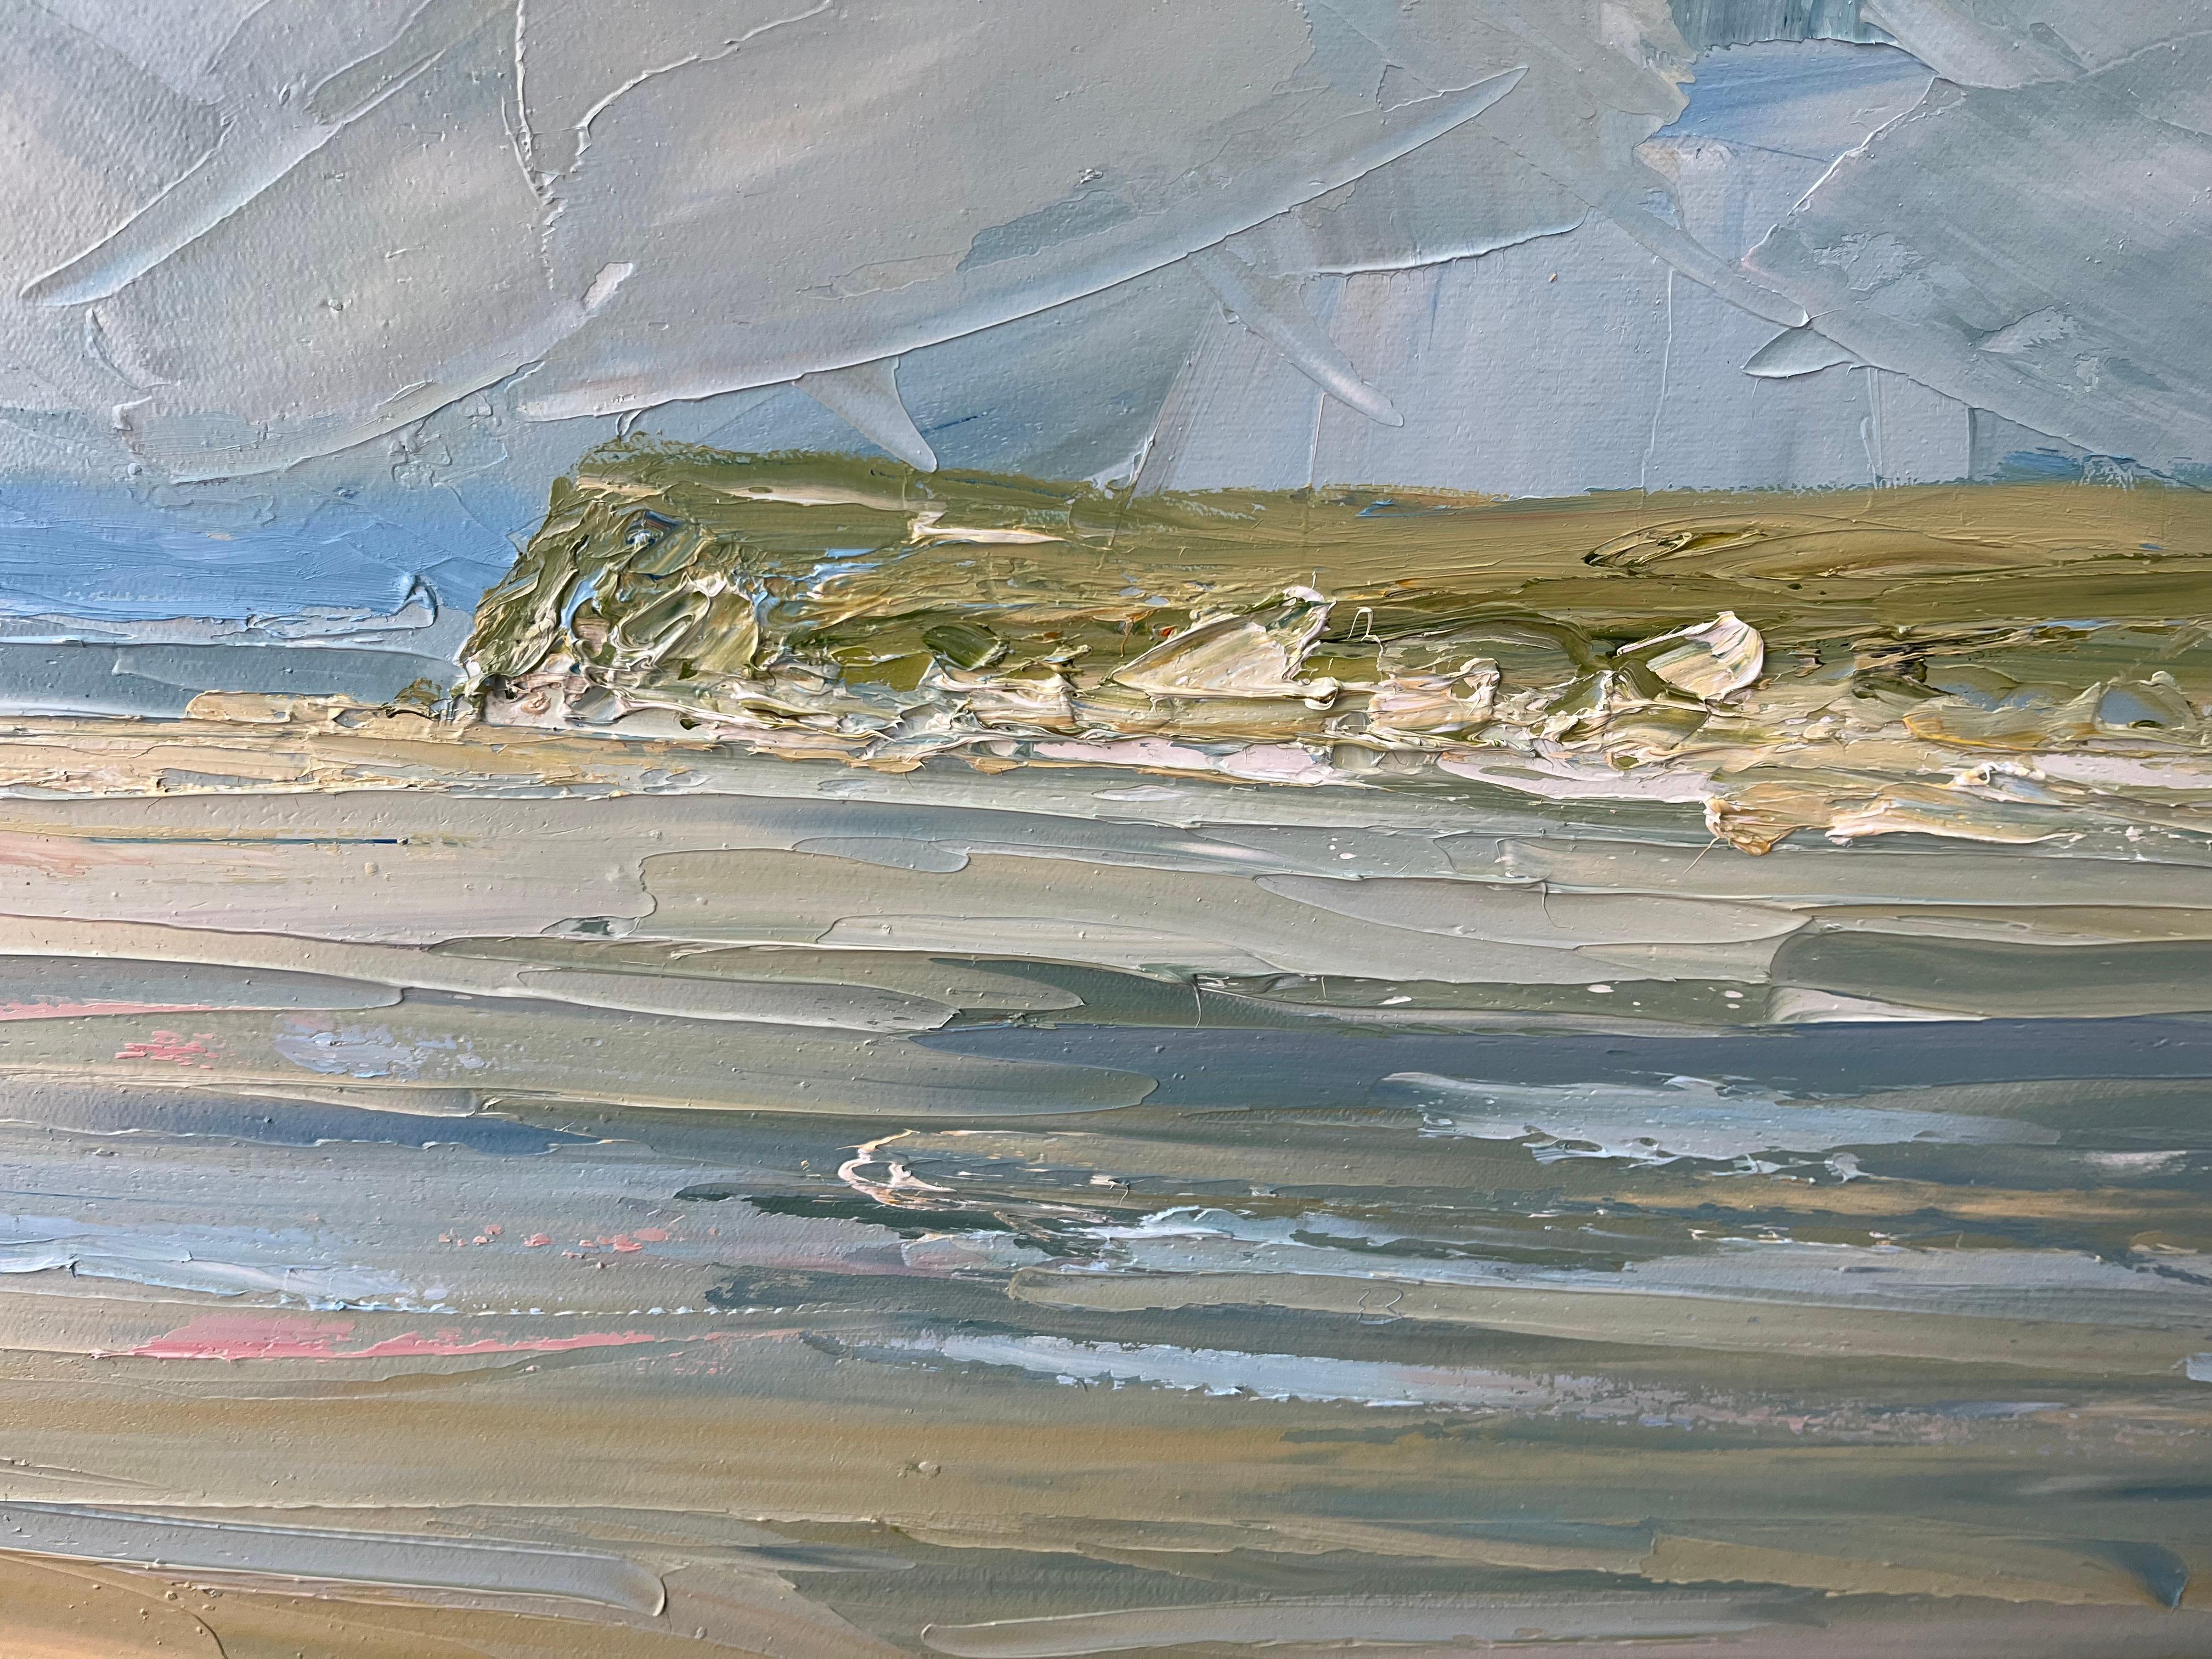 Daymer Bay, Original painting, Landscape, Seascape, Abstract, Beach, Cornwall - Contemporary Painting by Rupert Aker